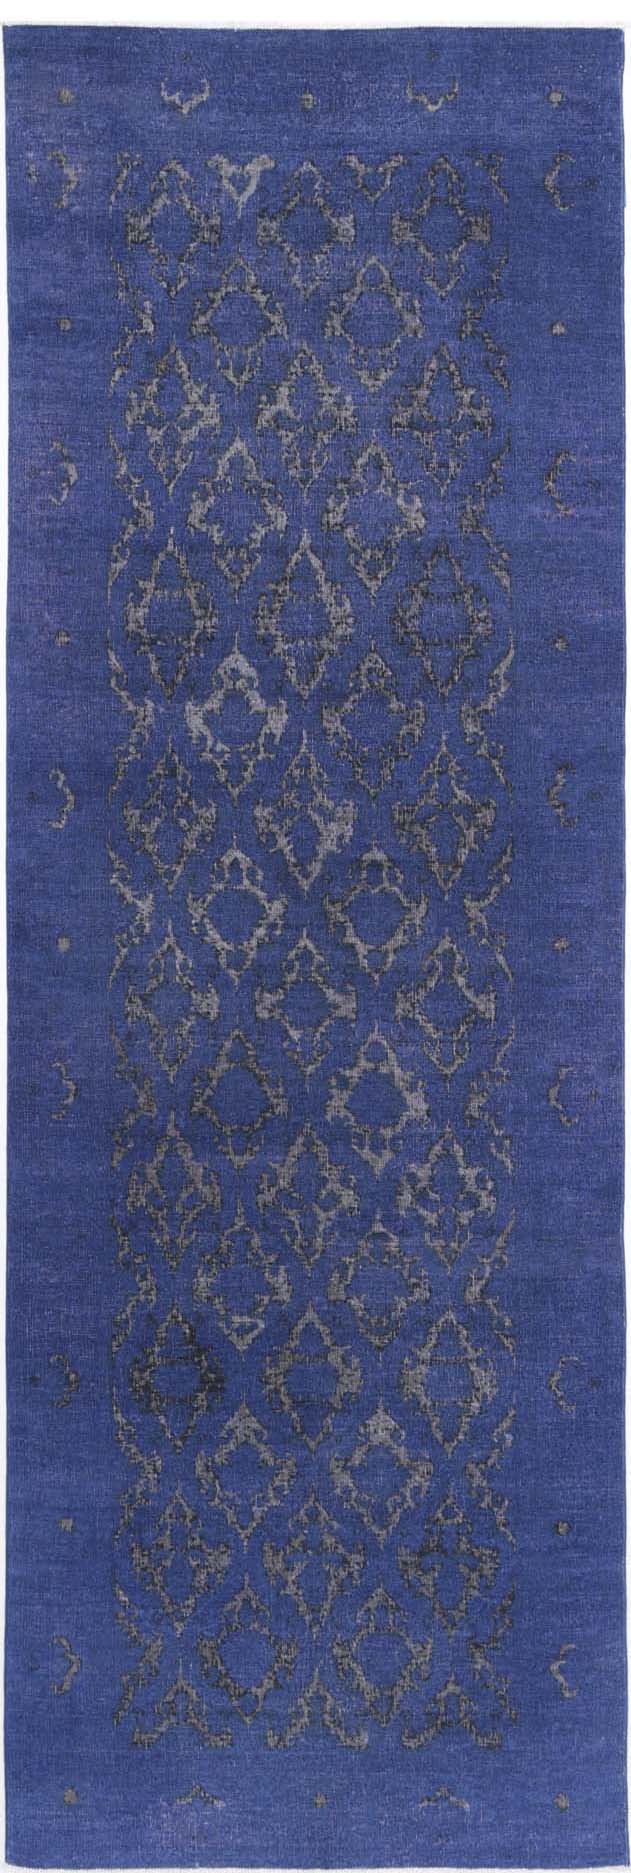 Hand Knotted Onyx Wool Rug - 3'10'' x 12'7''